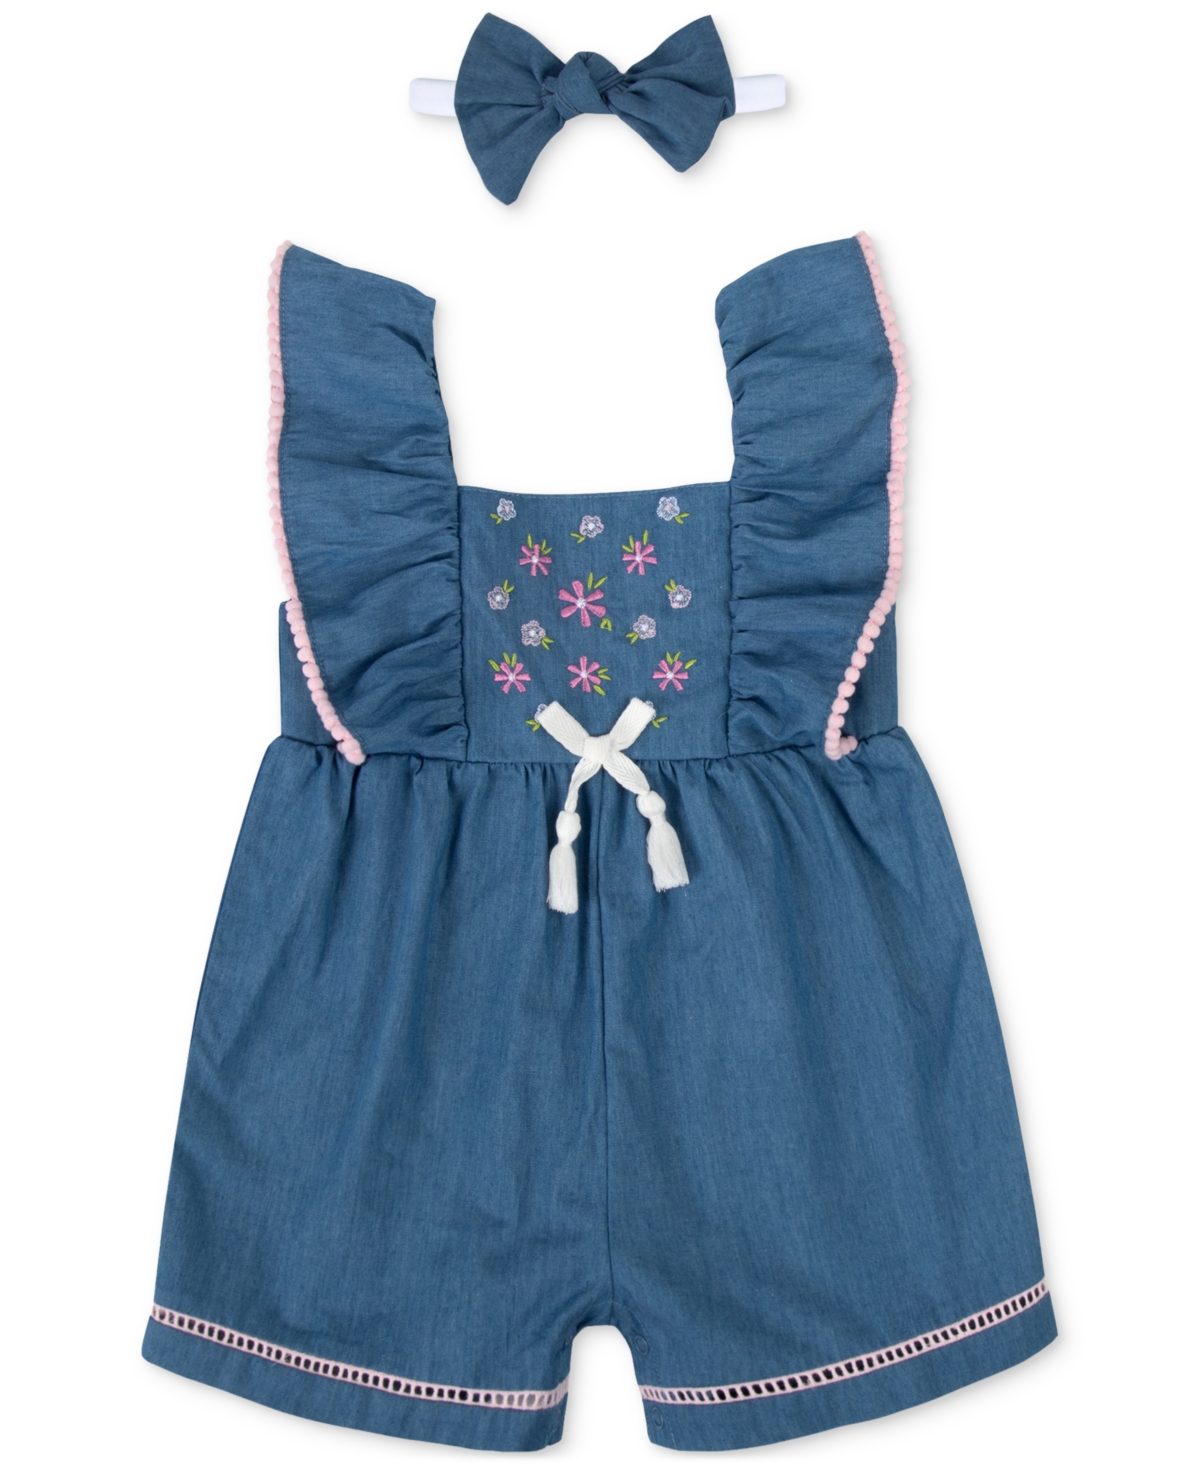 Baby Essentials Baby Girls Cotton Chambray Romper And Headband, 2 Piece Set In Navy